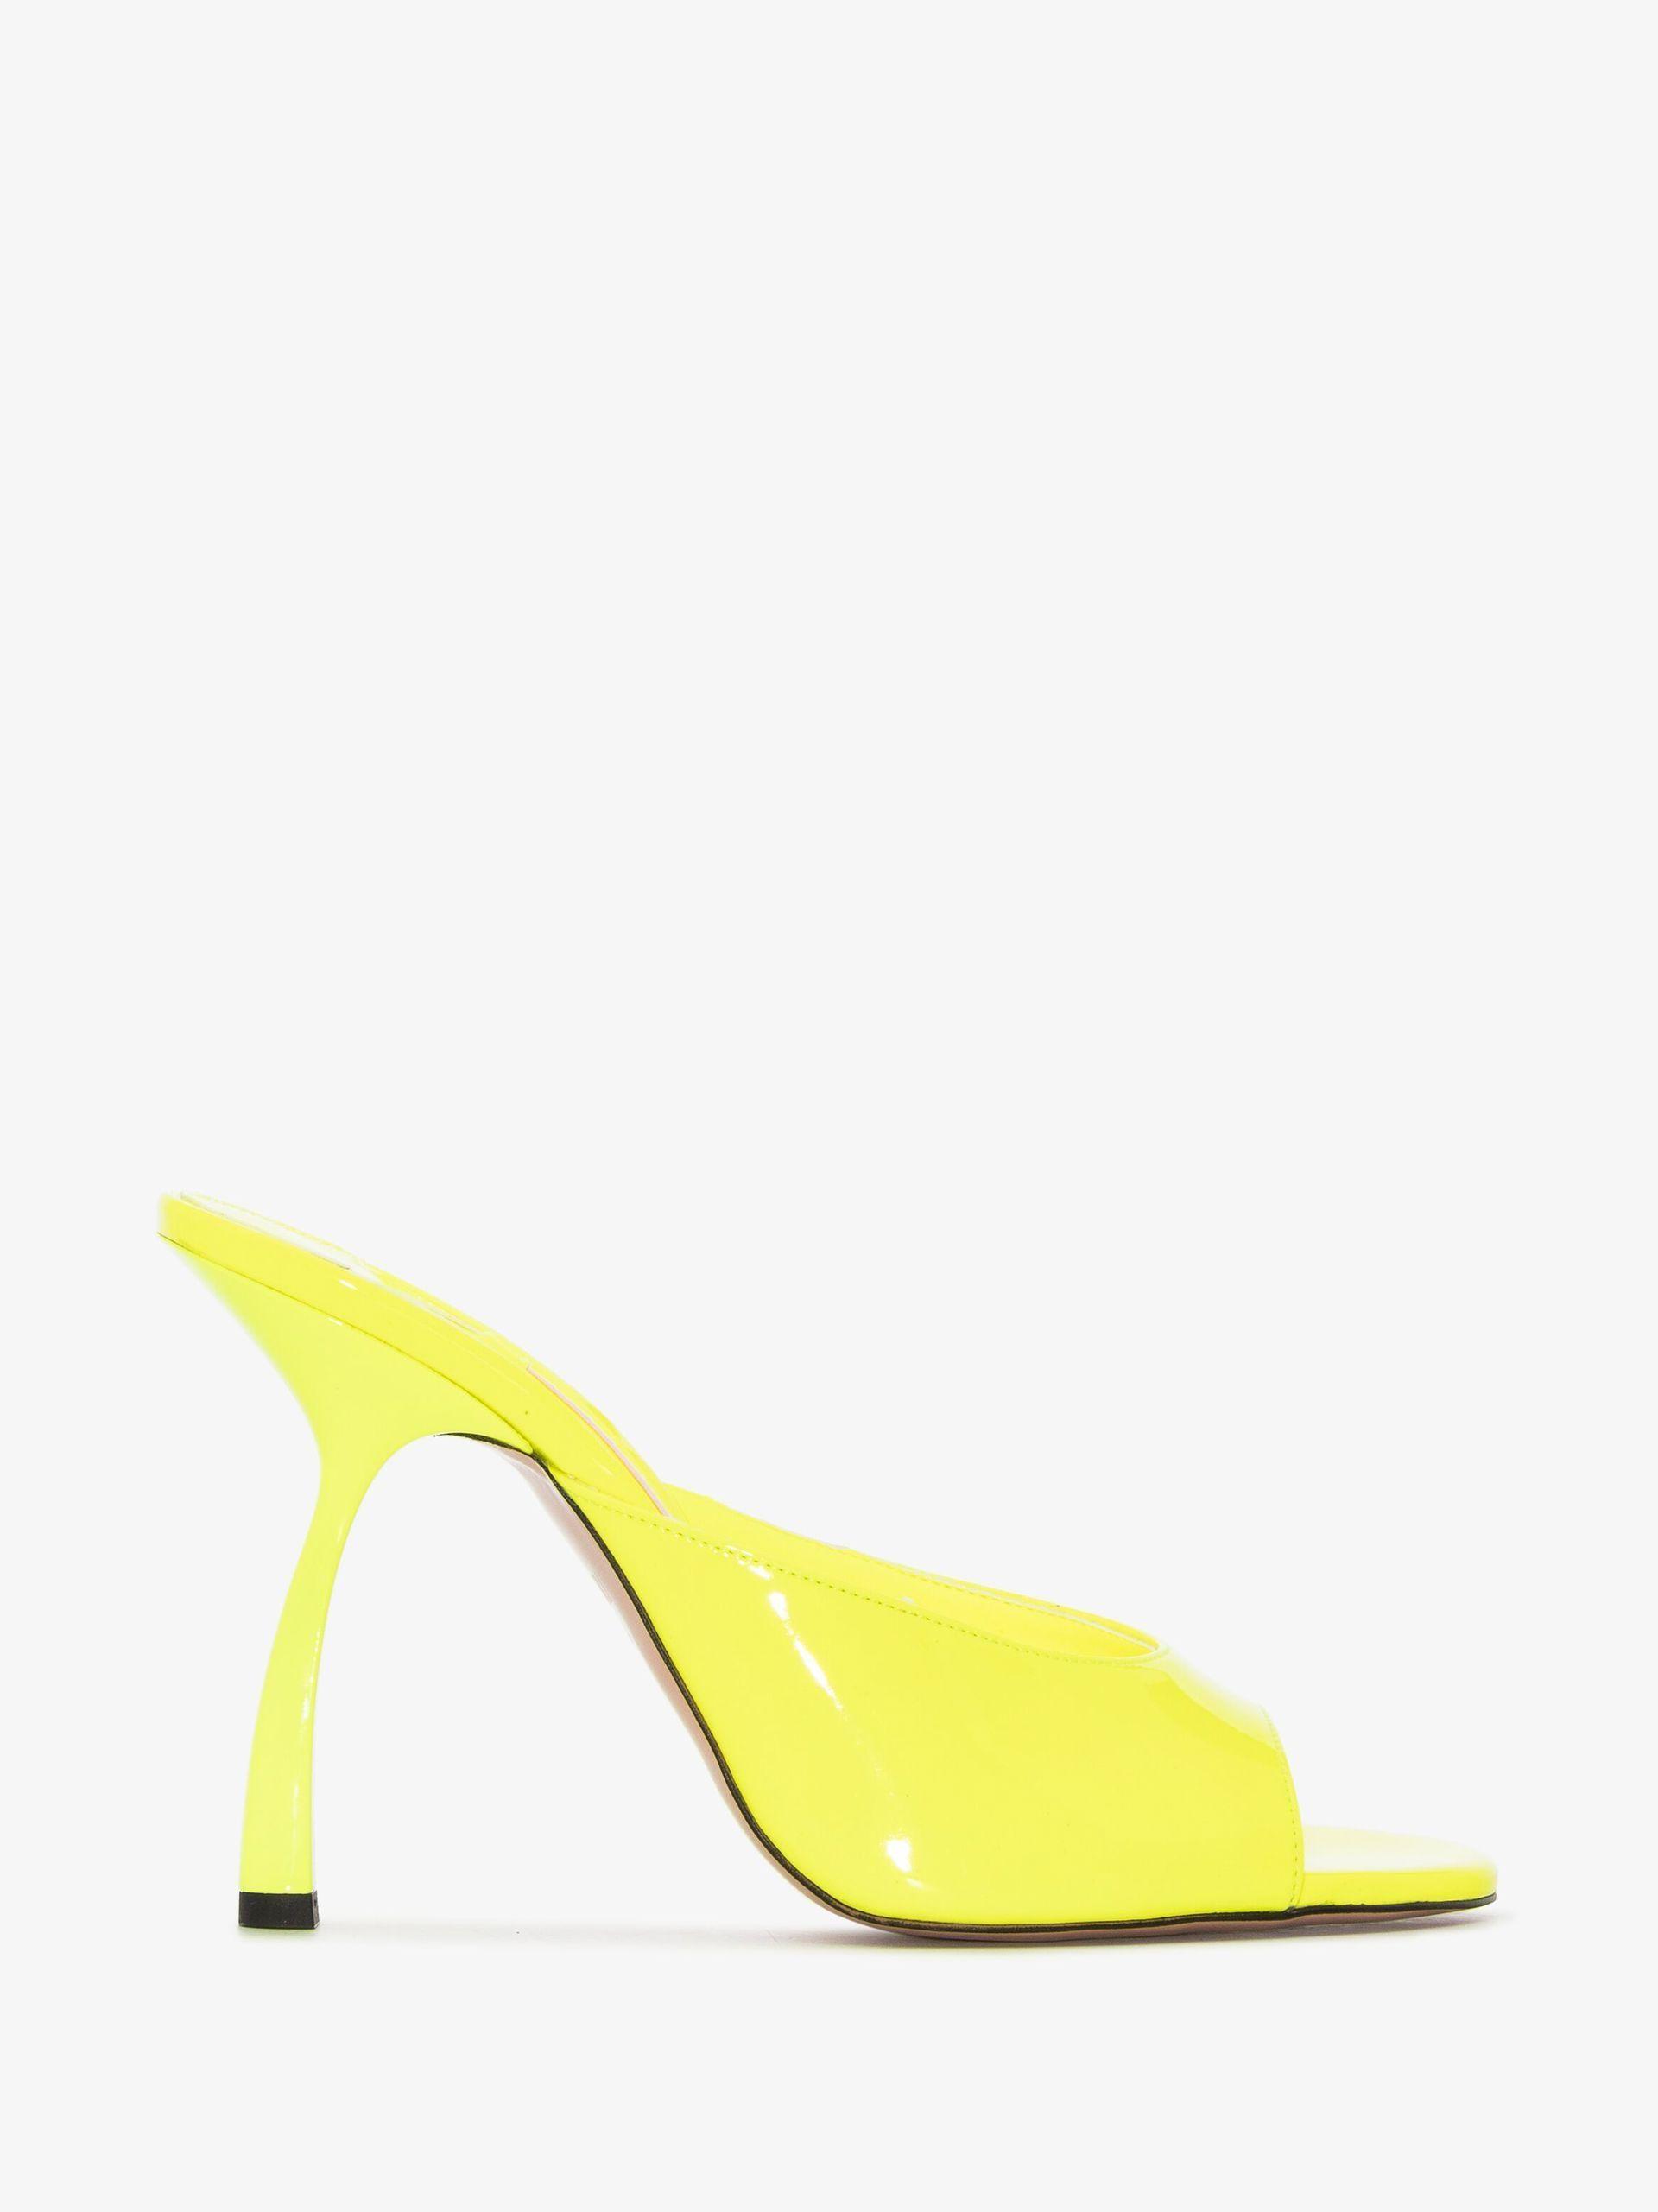 Piferi Leather Neon Yellow Tiana 100 Curved Heel Mules | Lyst